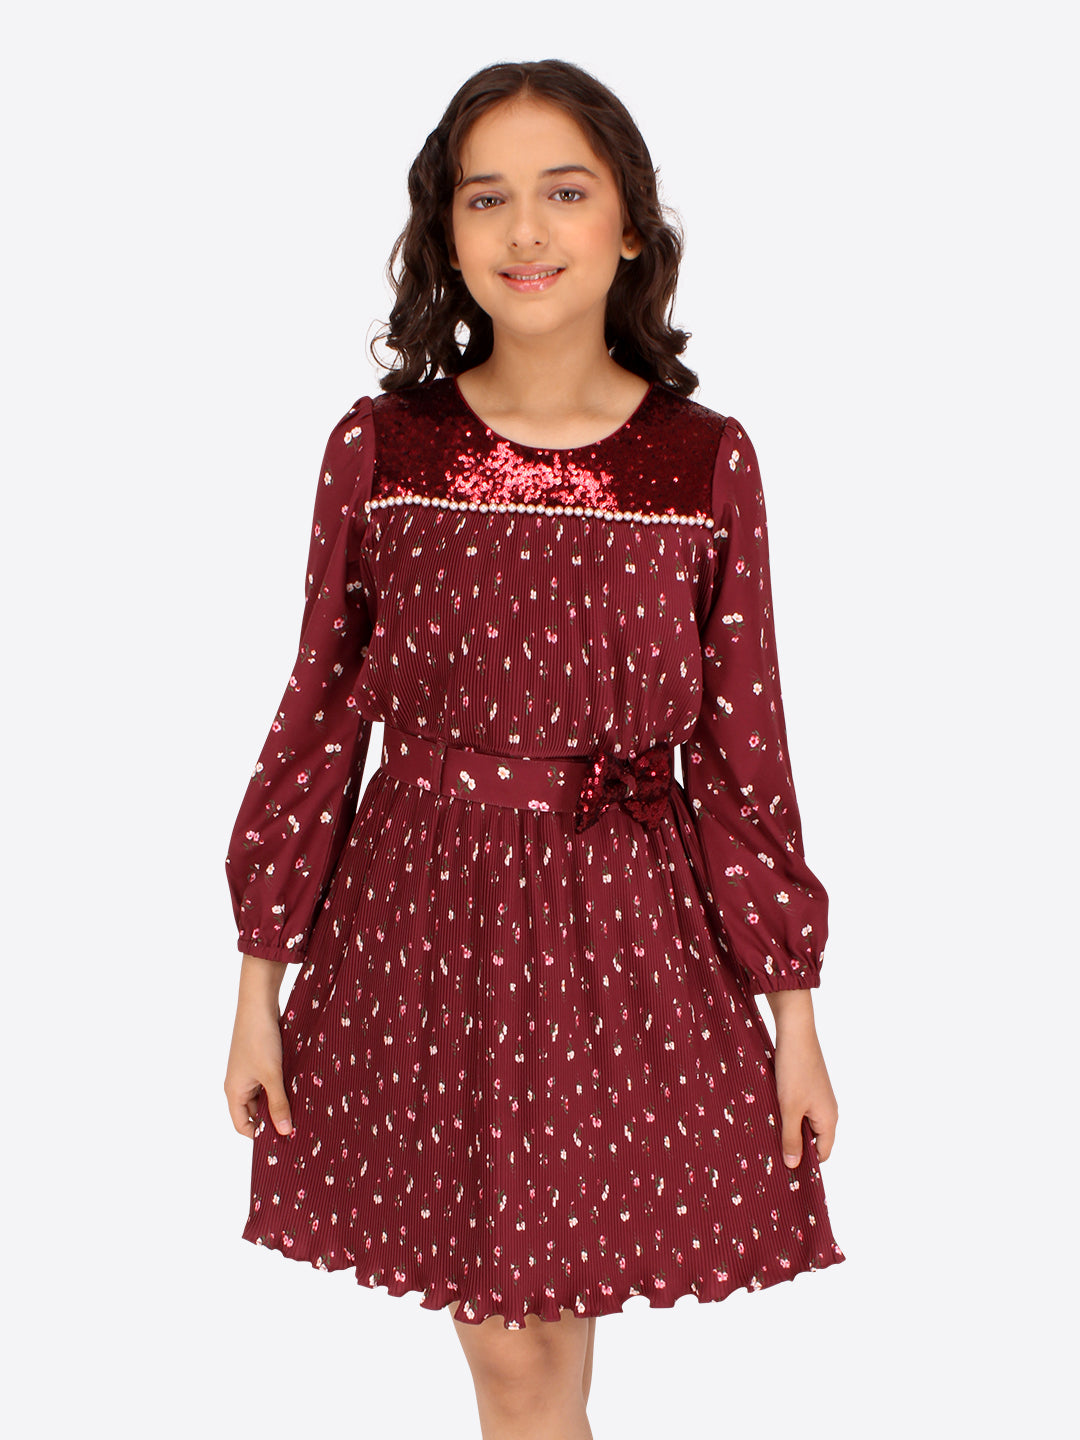 Cutecumber Girls Georgette Floral Printed Sequined Full Sleeves Dress with a Detachable Belt